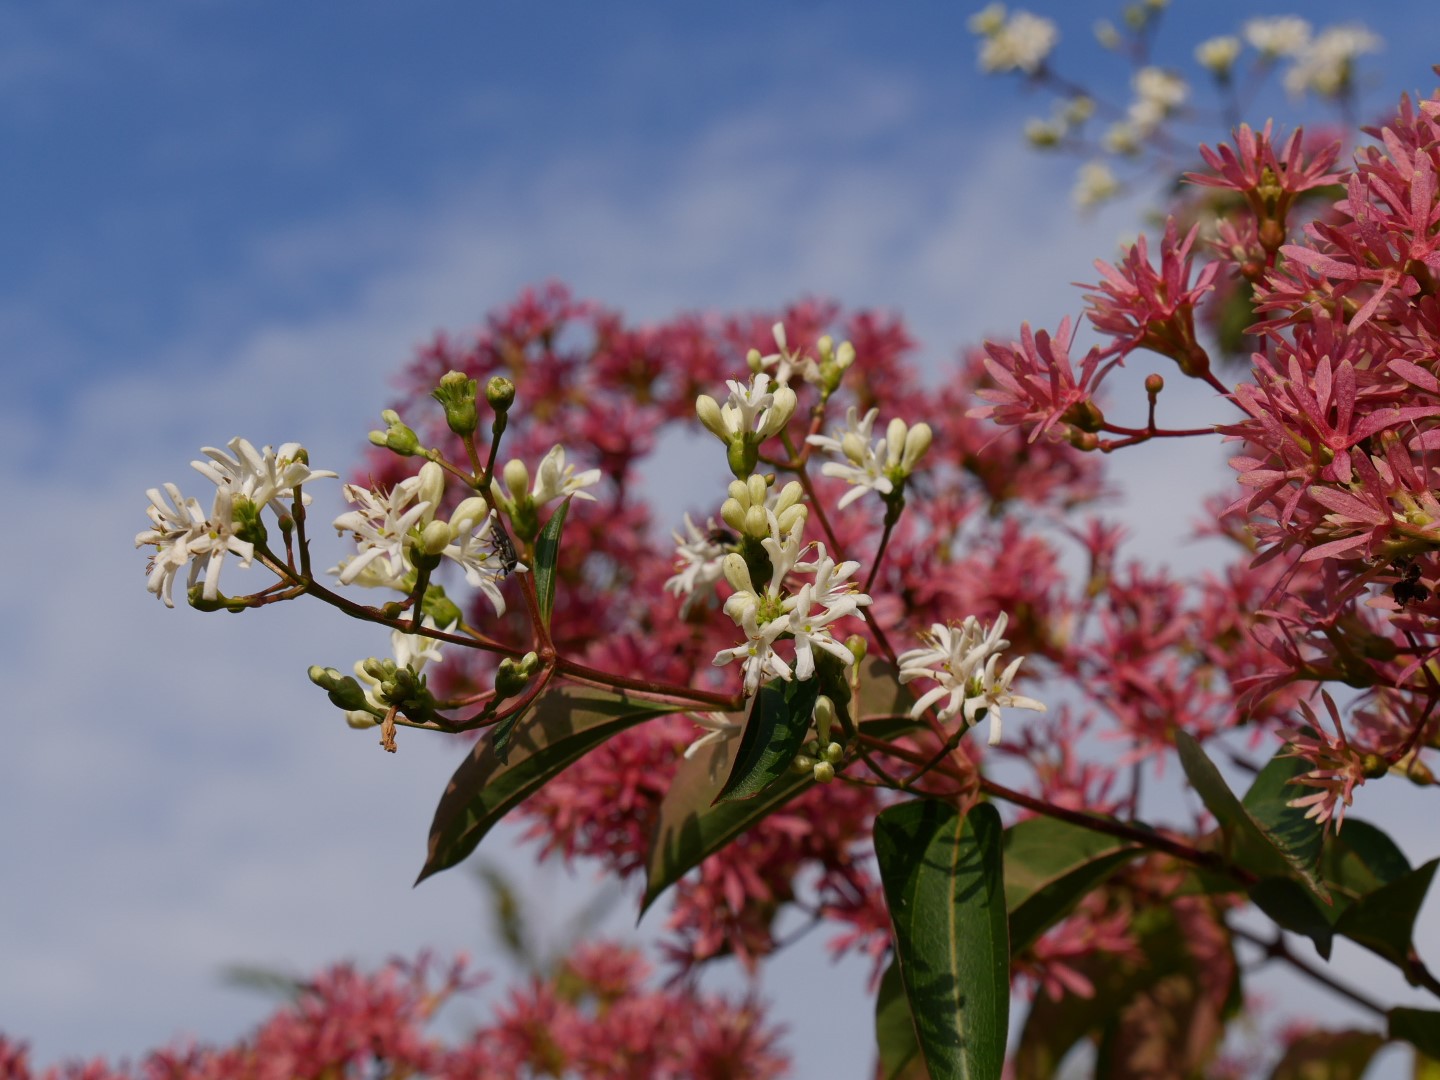 Heptacodium Miconioides High Quality Wallpapers